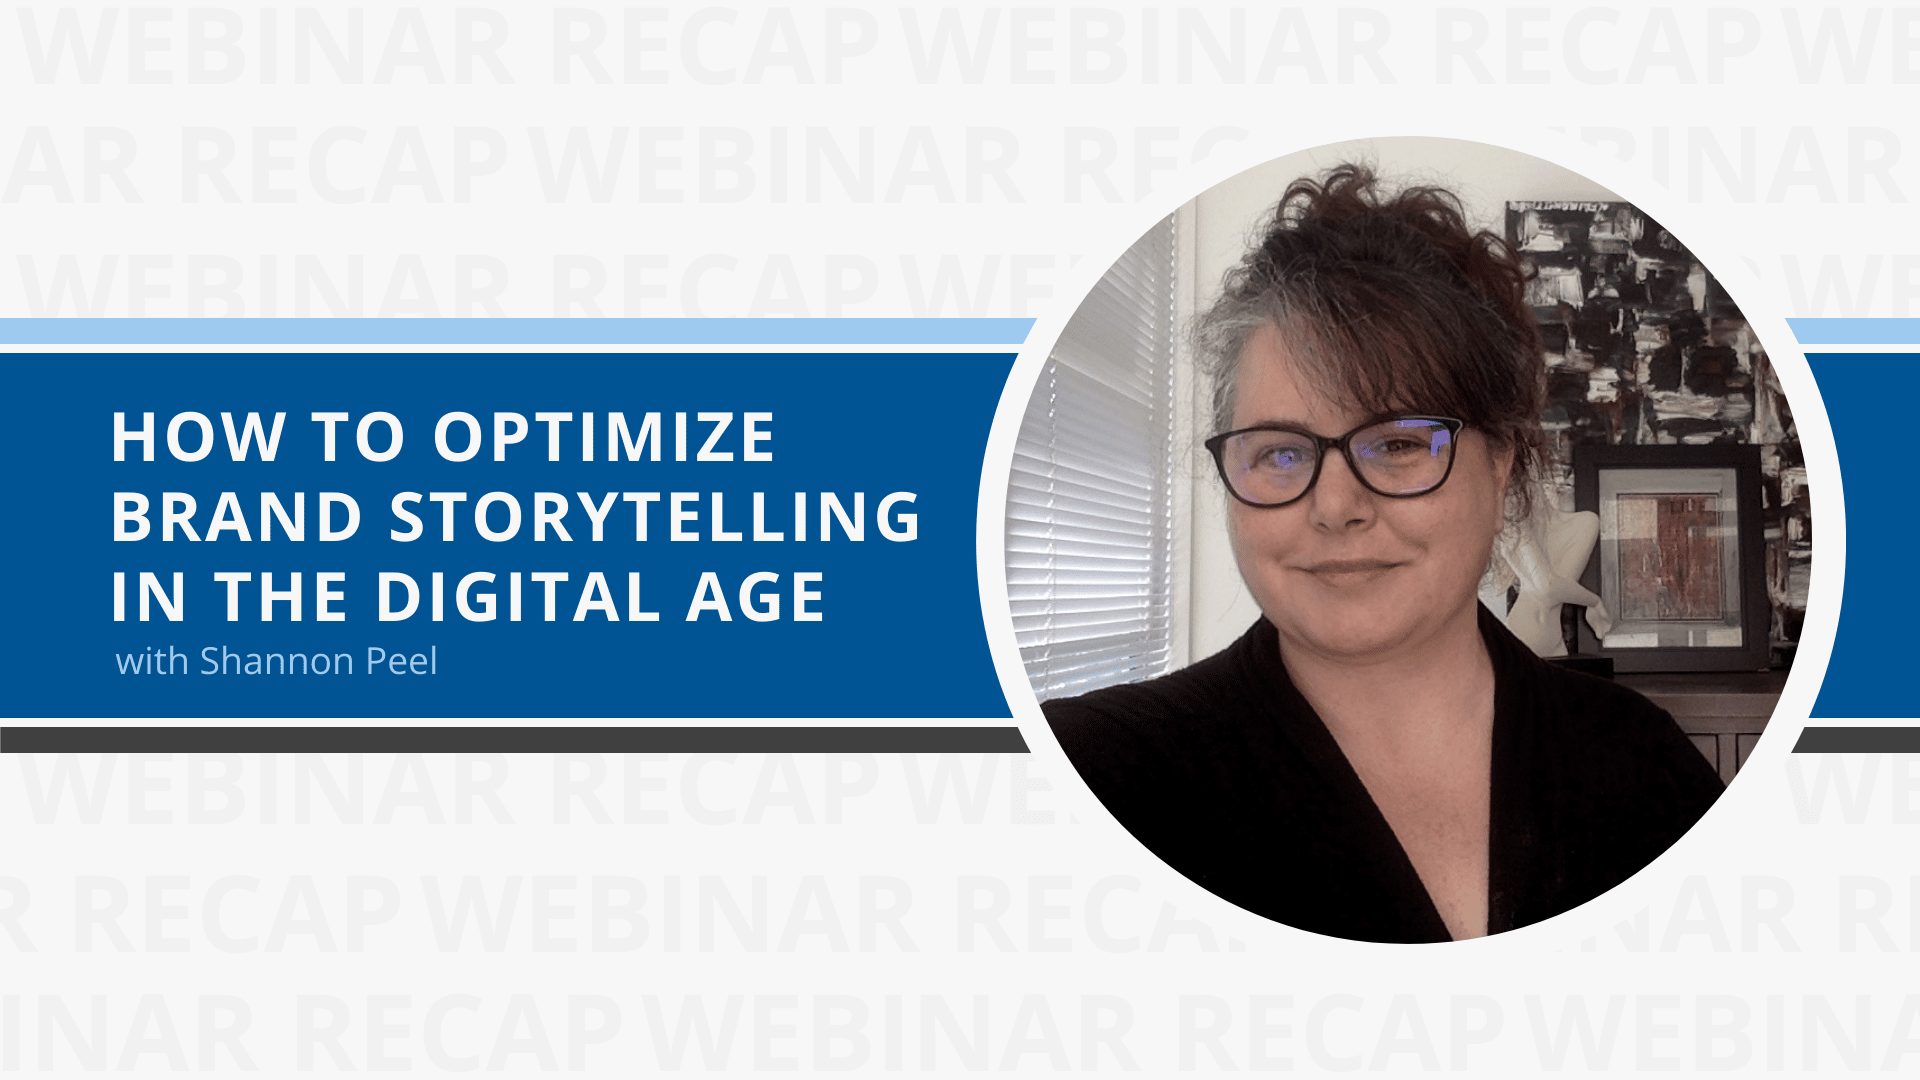 How to optimize brand storytelling in the digital age: Agility webinar recap